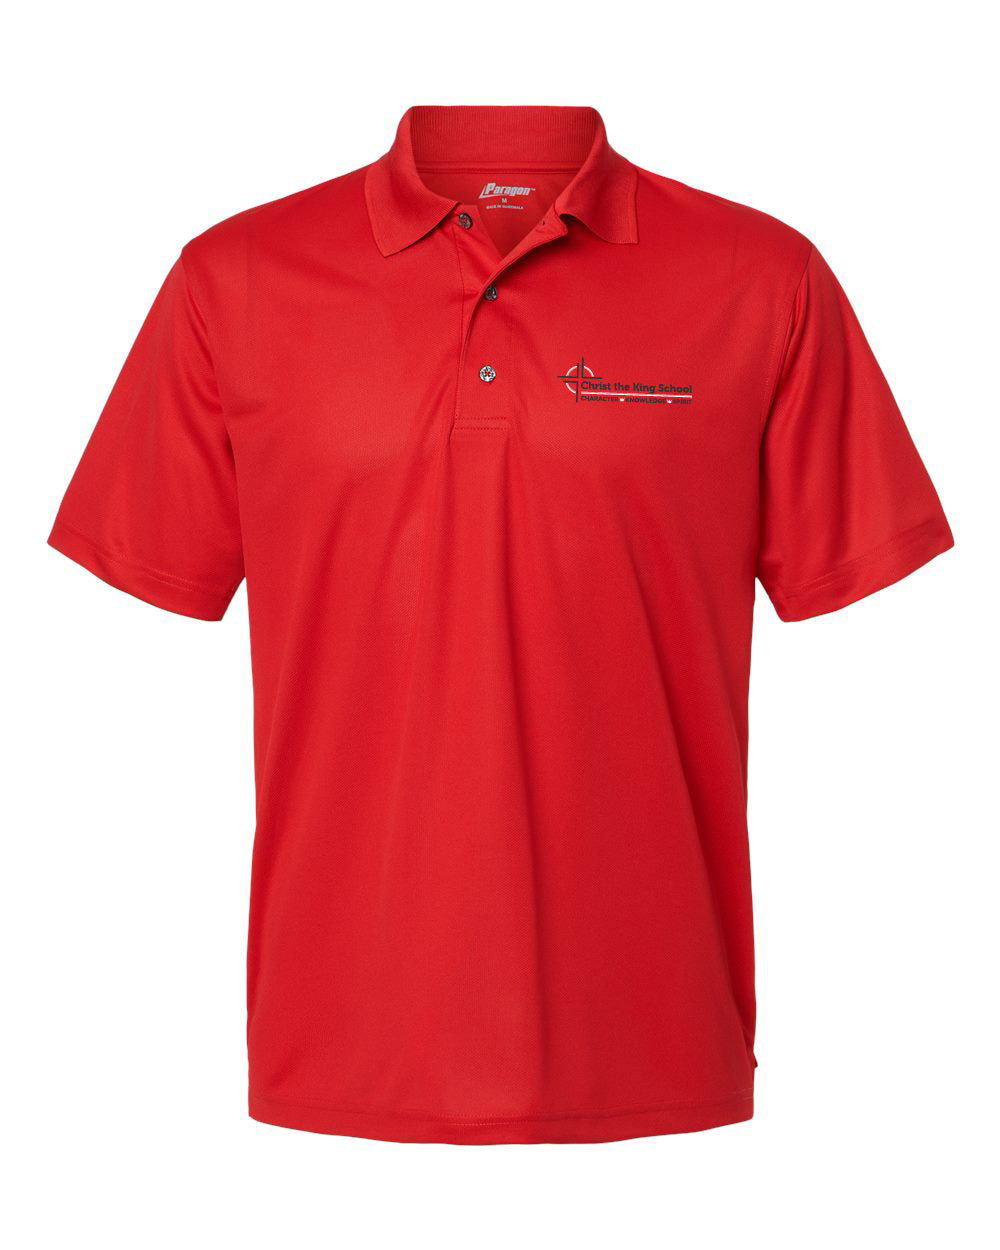 YOUTH - Dry Fit Short Sleeve Polo - Red